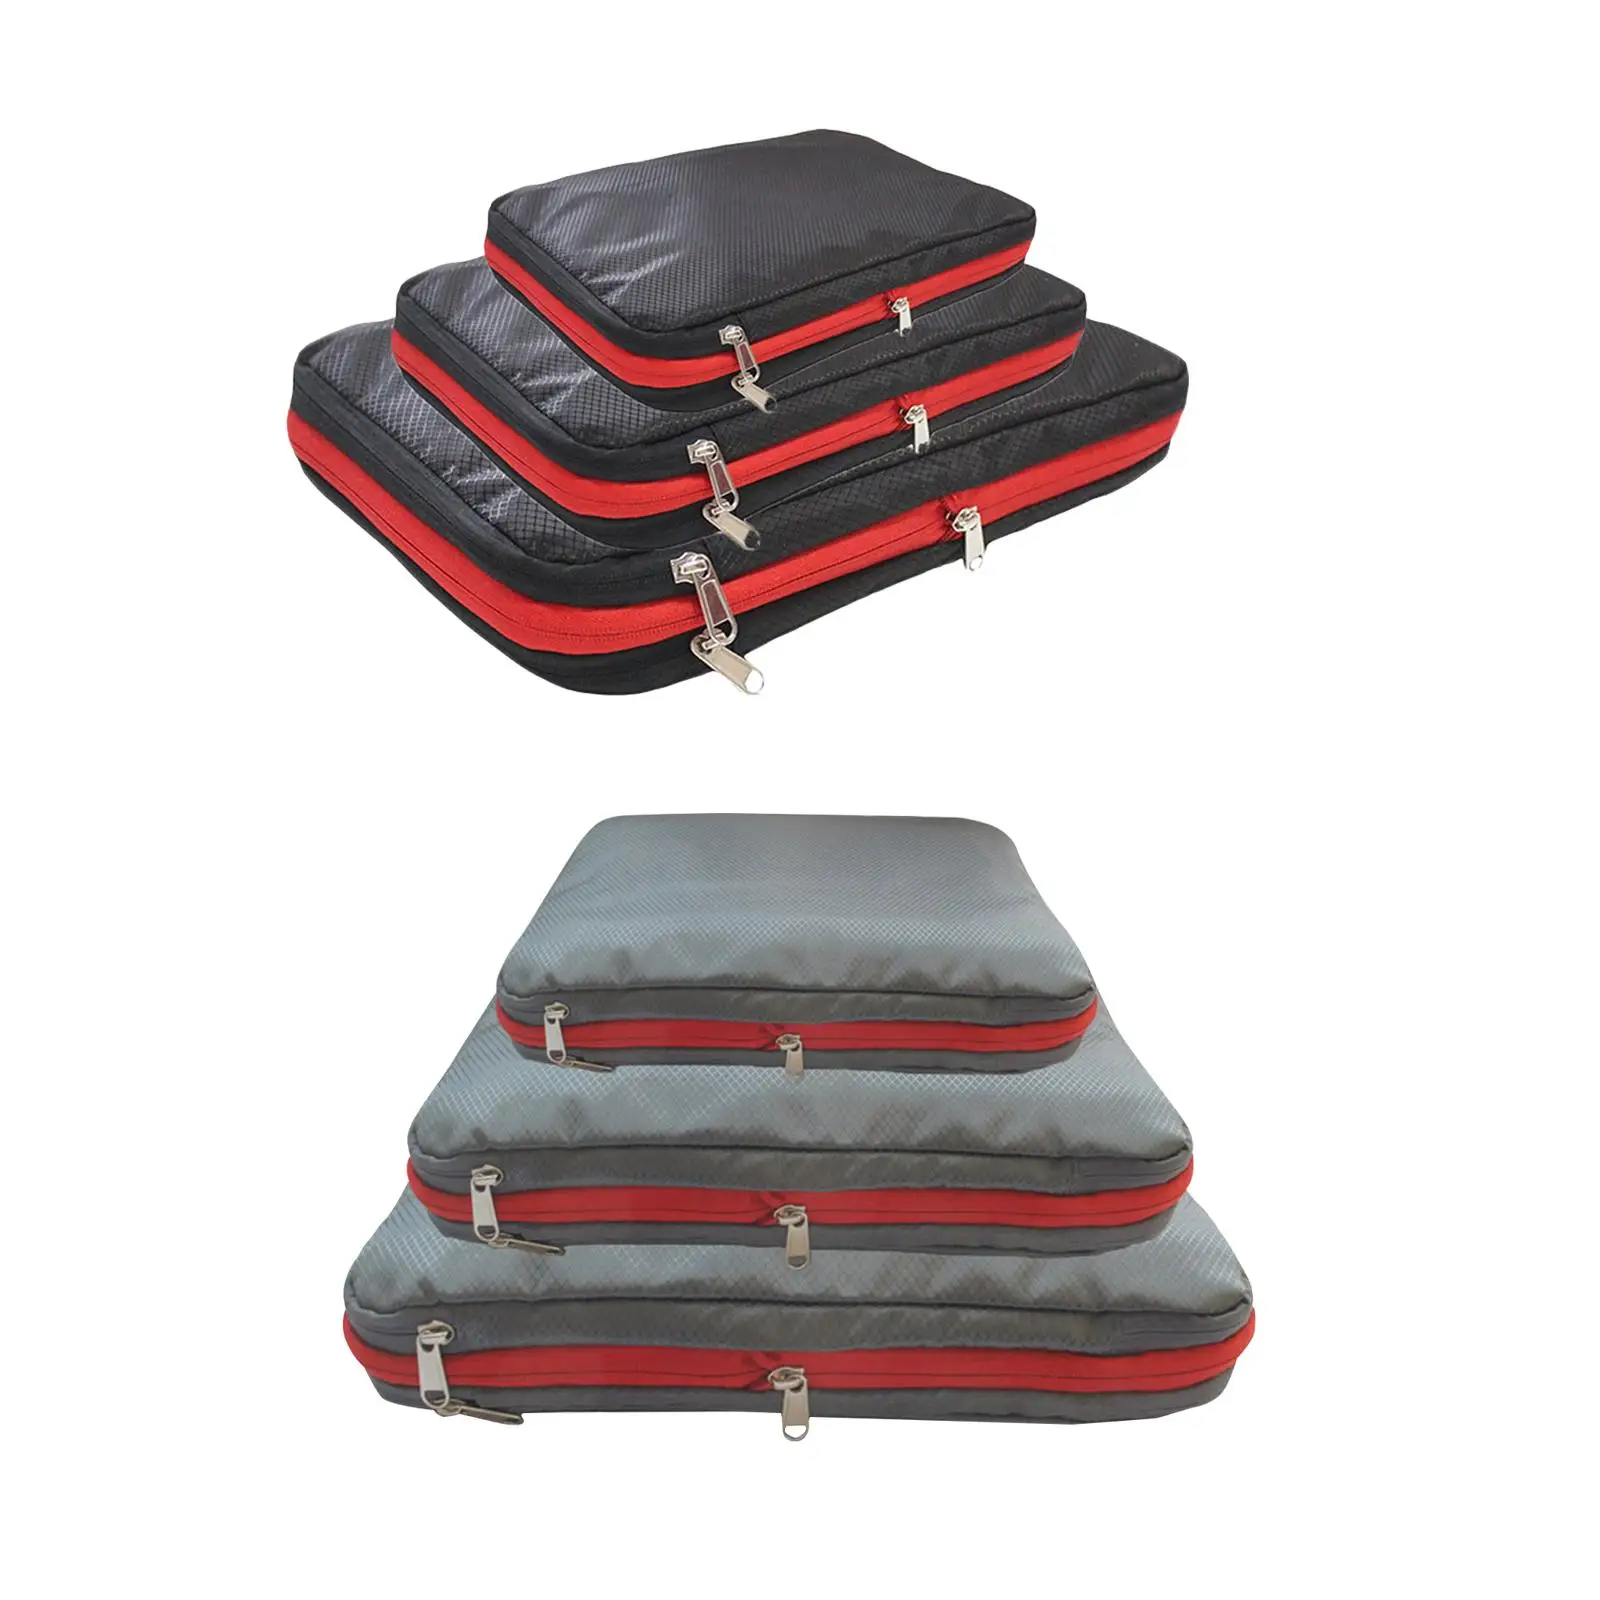 3Pcs Compression Packing Cubes Bag Luggage Packing Organizer Accessories Double Layer Nylon for Travel